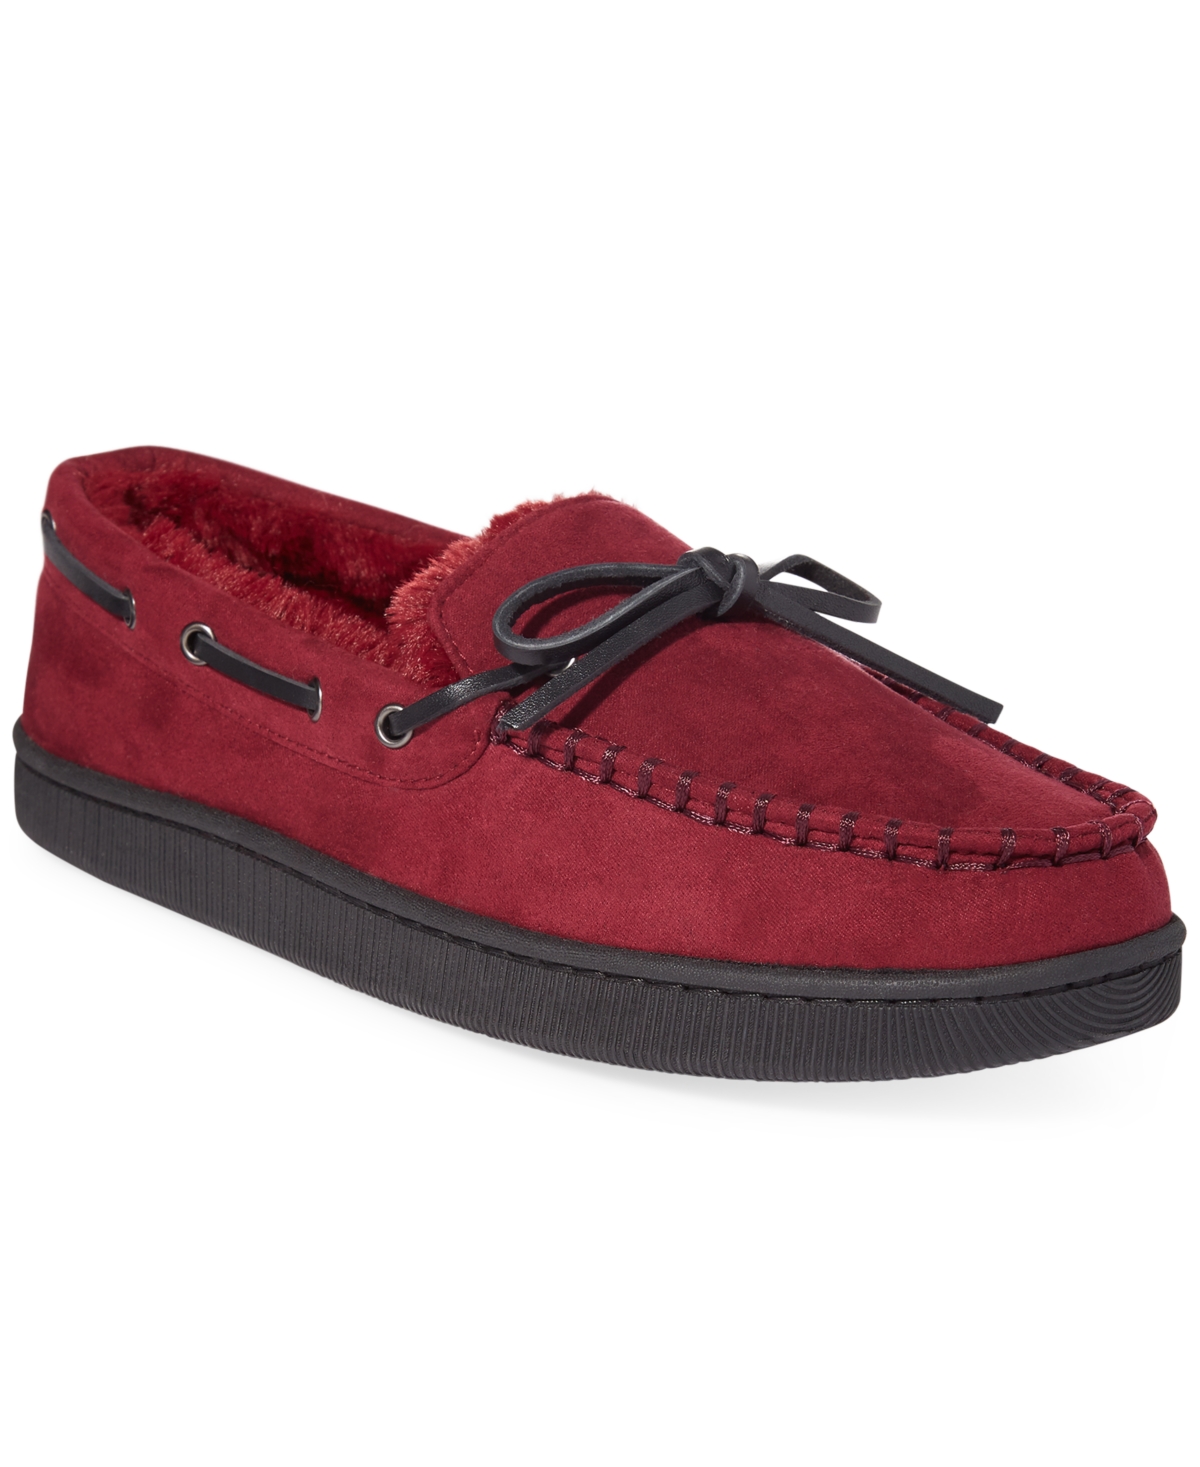 Men's Moccasin Slippers, Created for Macy's - Burgundy